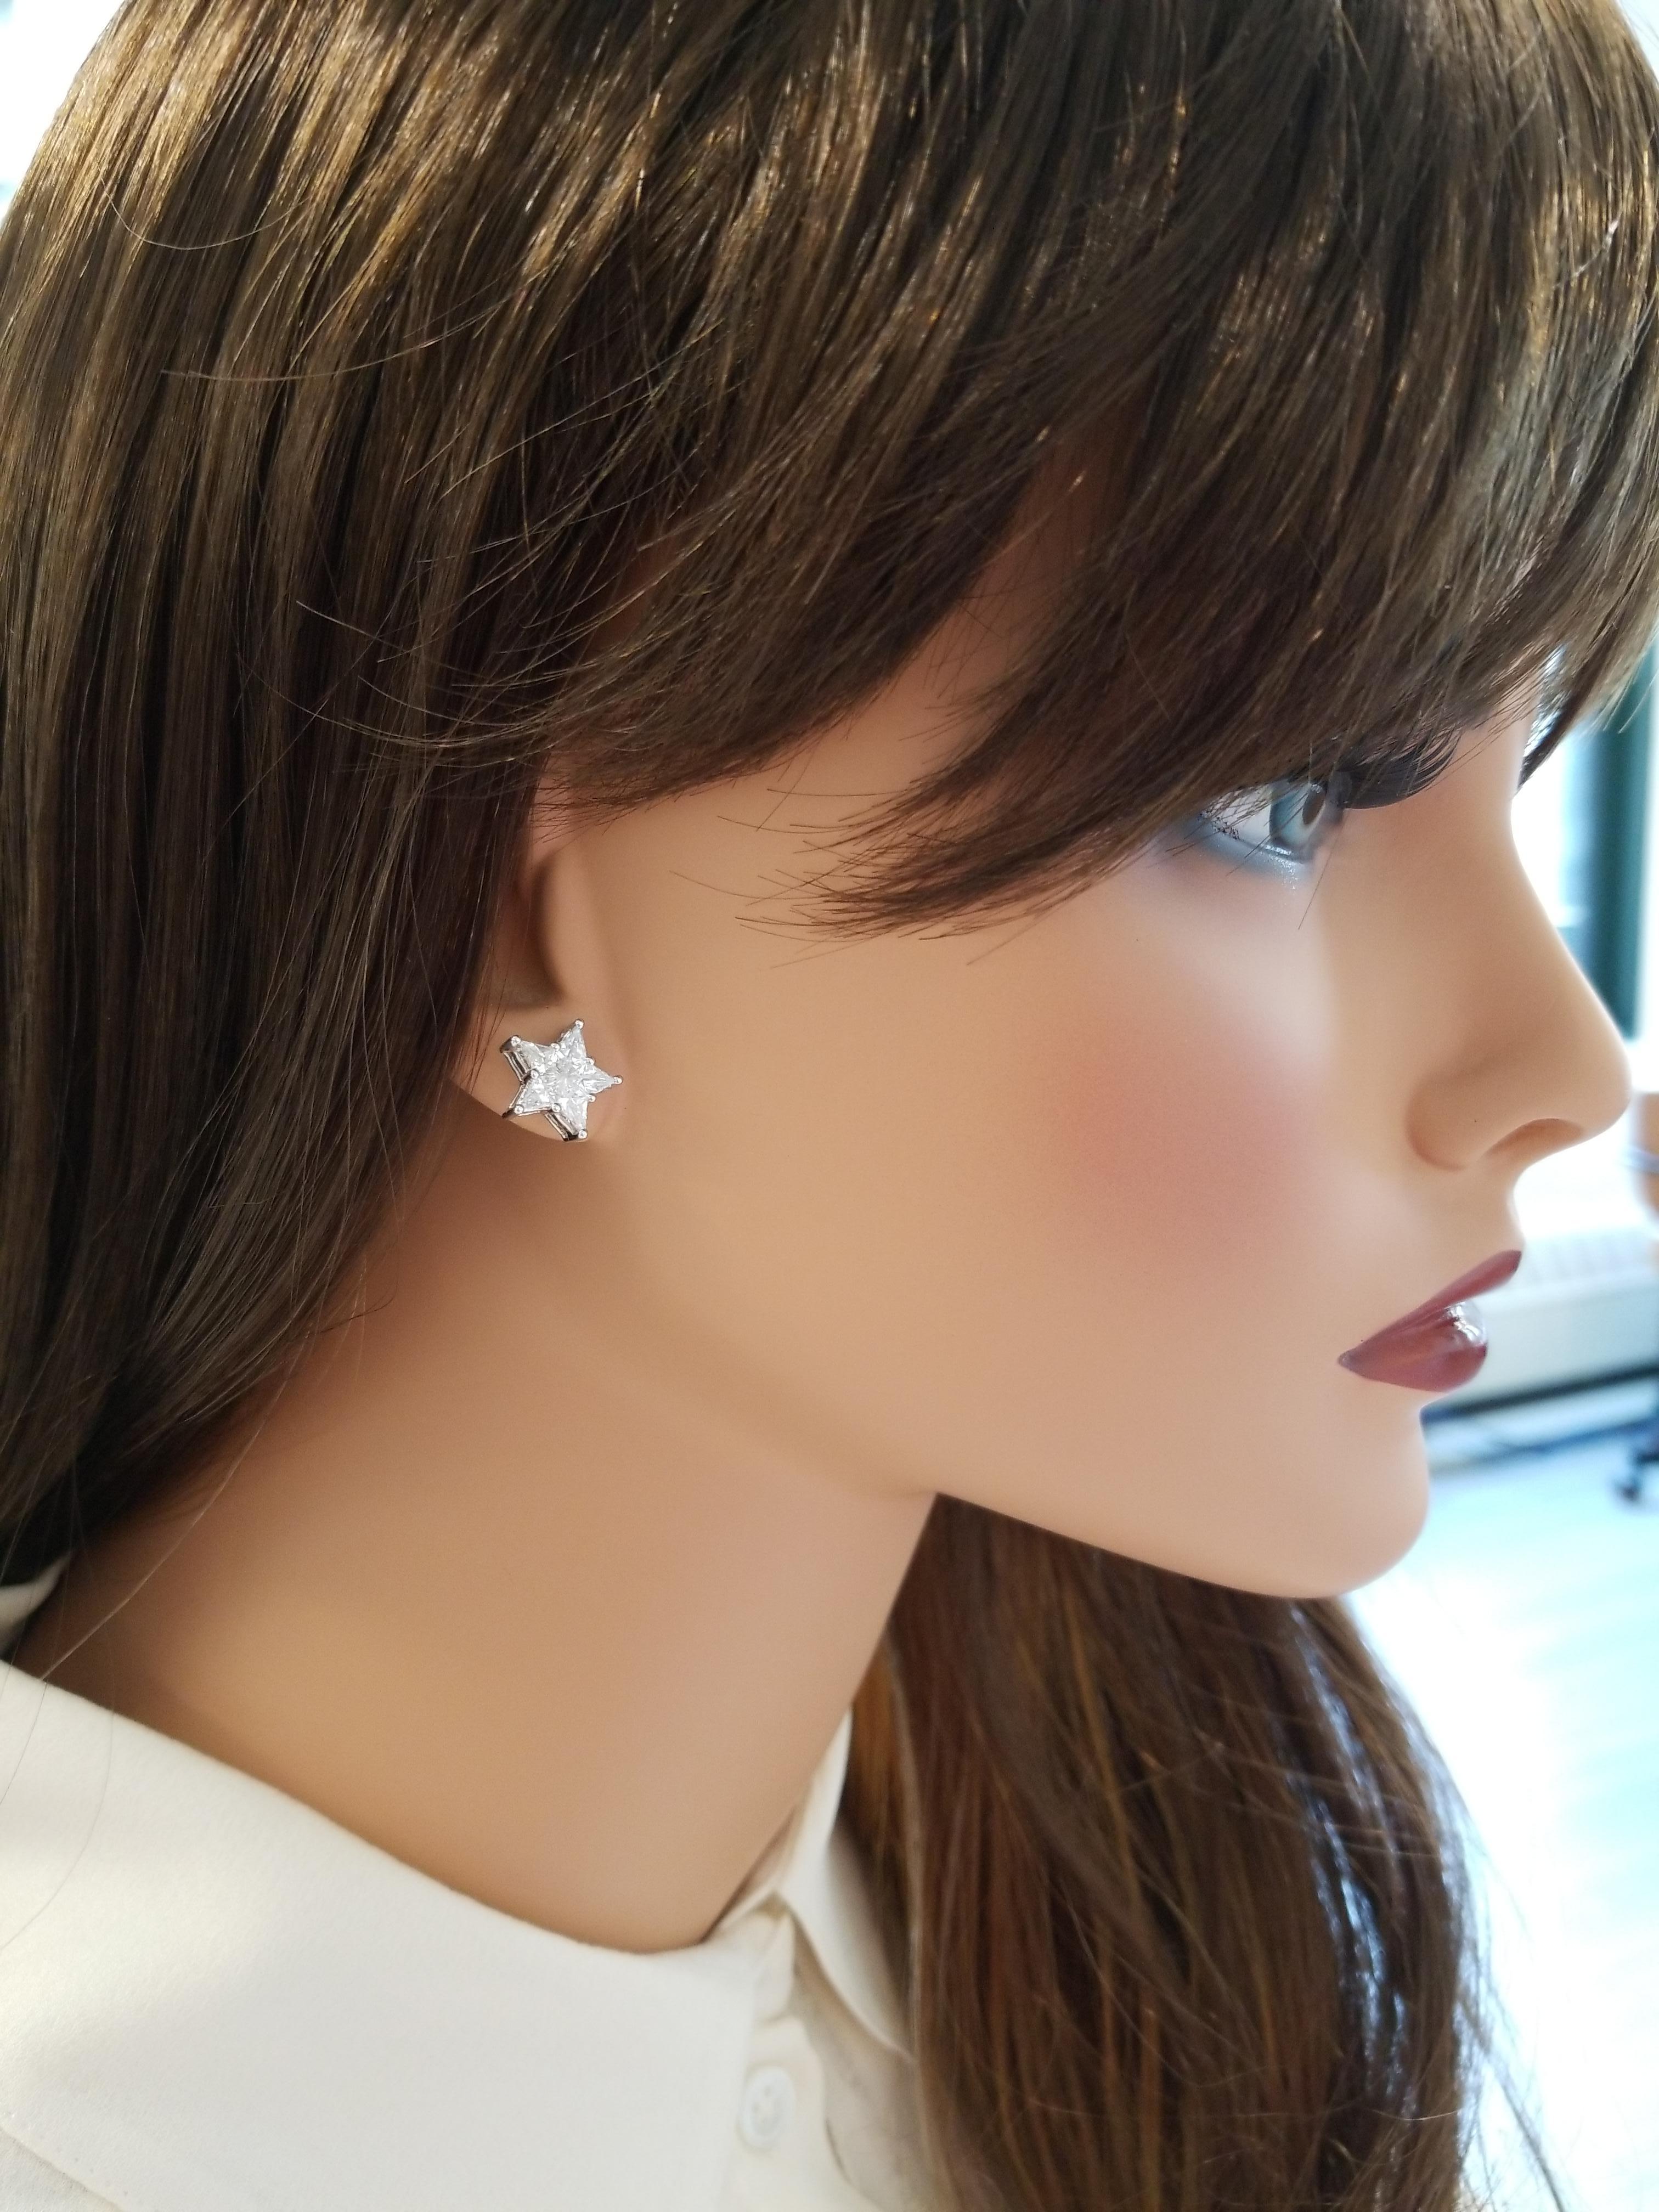 These are distinct stud earrings that feature 10 kite-shaped diamonds arranged in a scintillating star shape totaling 2.03 carats. The diamonds are invisible set, so there is no metal between the diamonds. Created in brightly polished 18 K white